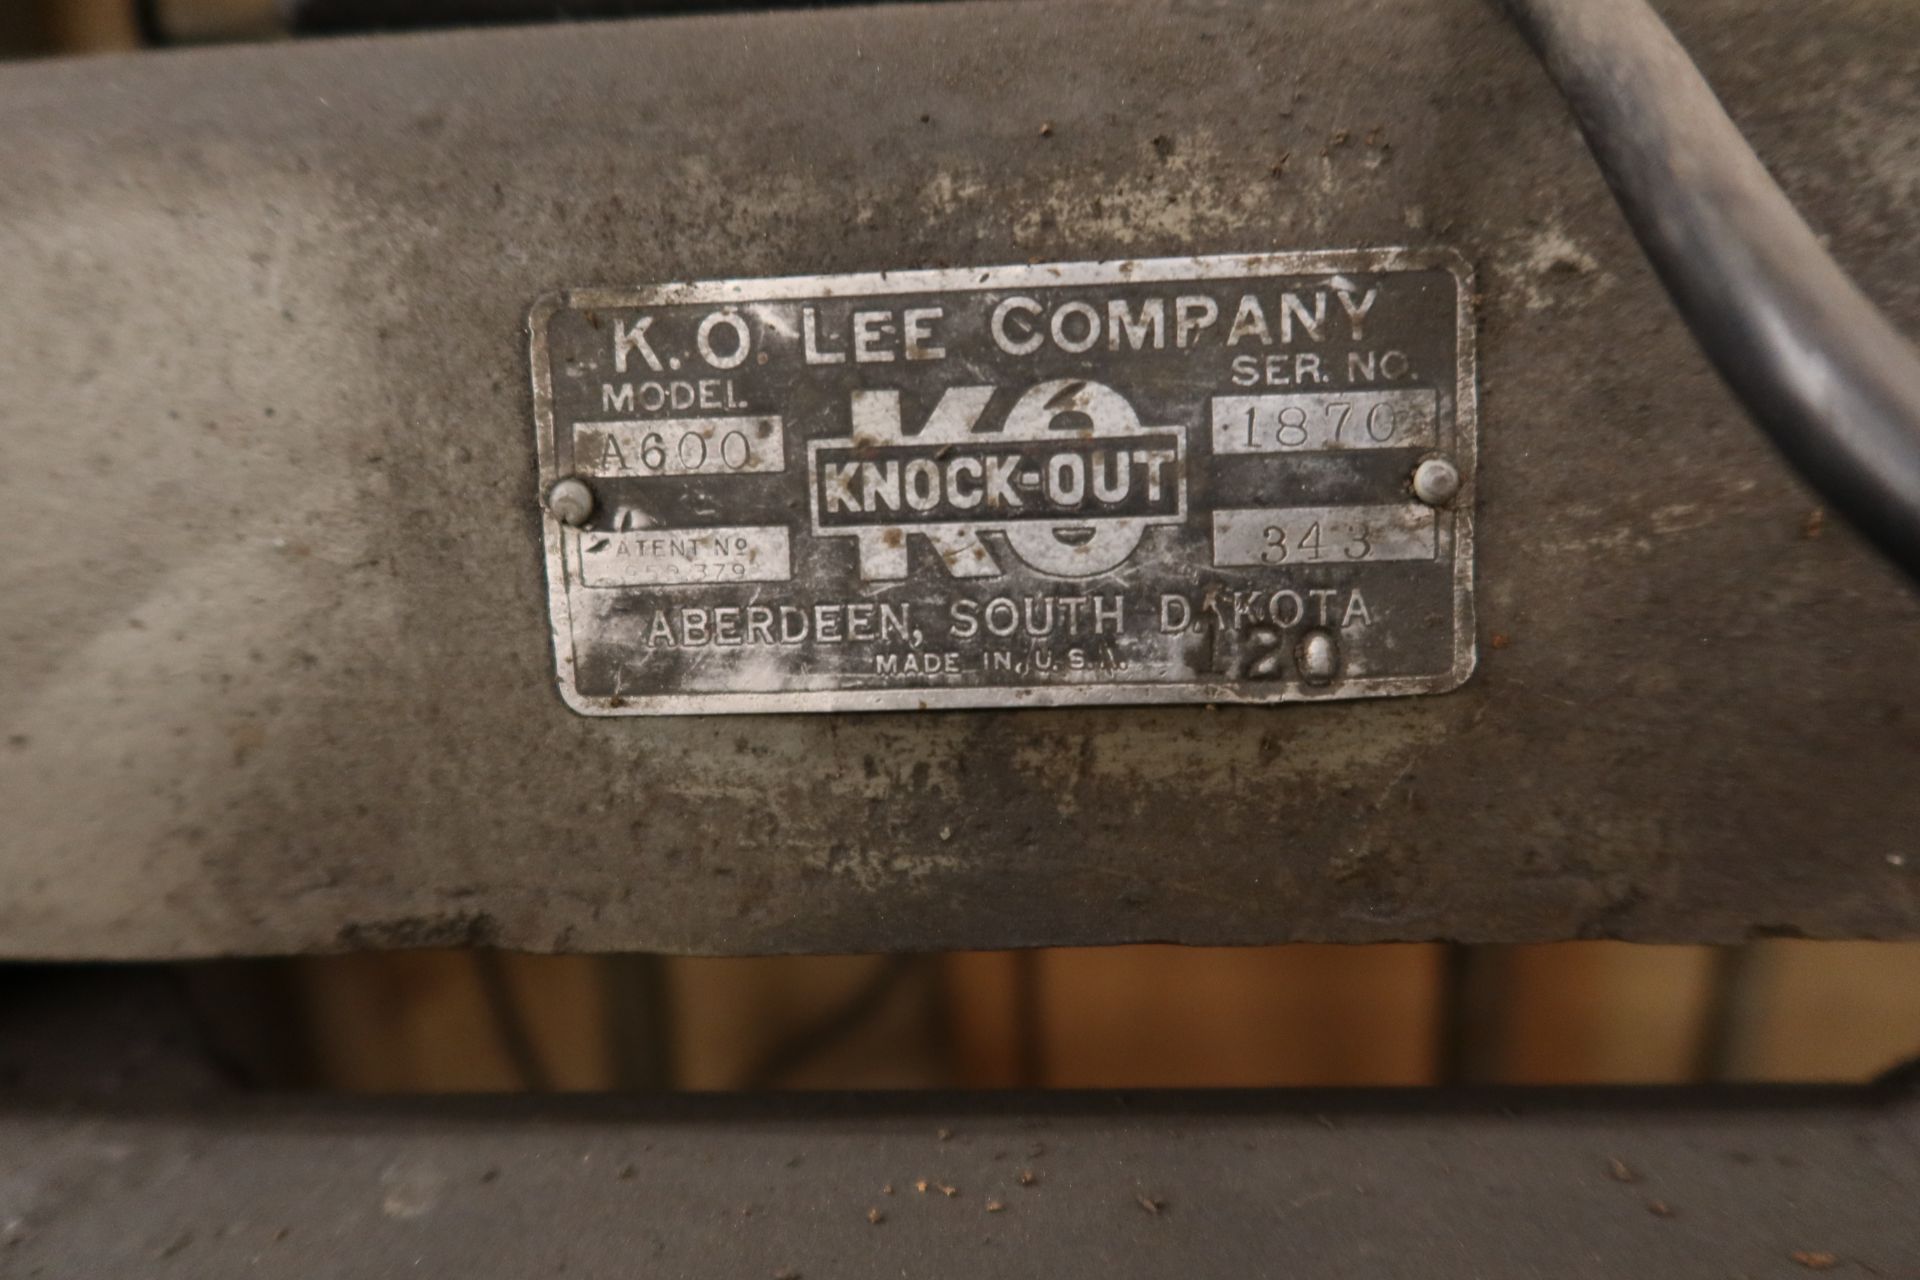 KNOCK-OUT MDL. A-600 21" TOOL 7 CUTTER GRINDER SN. 1870 - Image 2 of 2